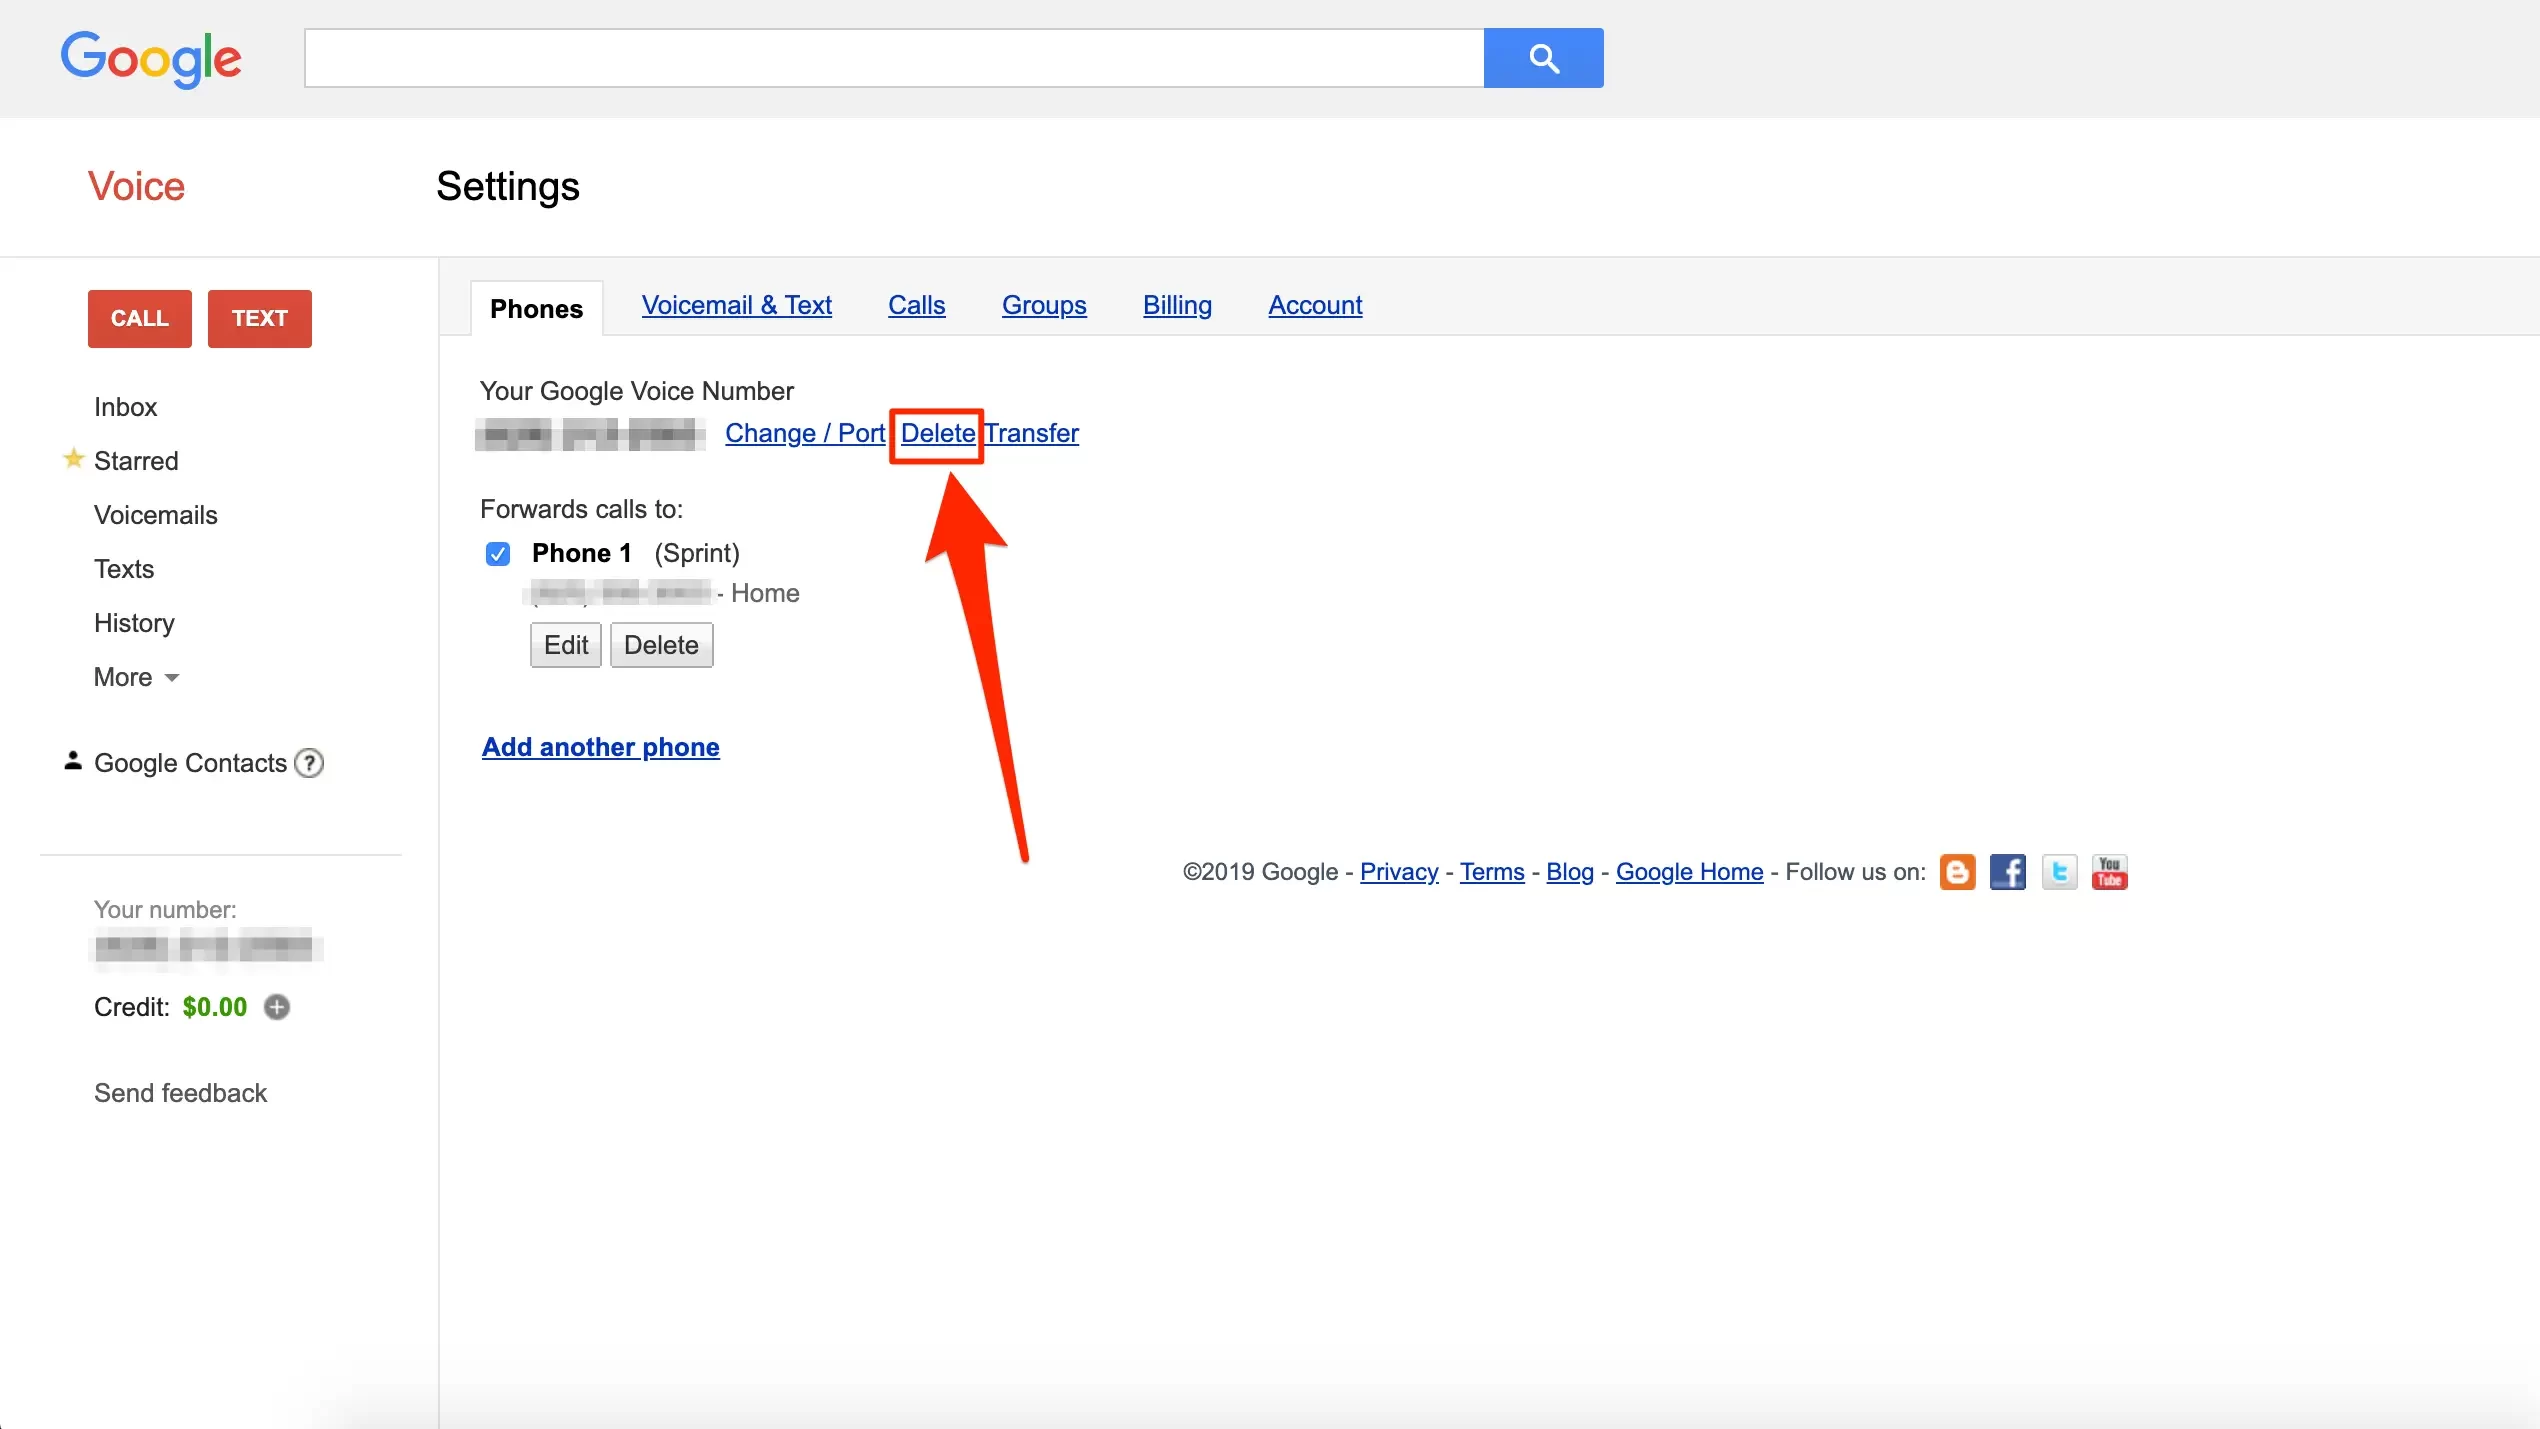 Next to your Google Voice number, click the Delete option to delete your Google Voice account permanently.